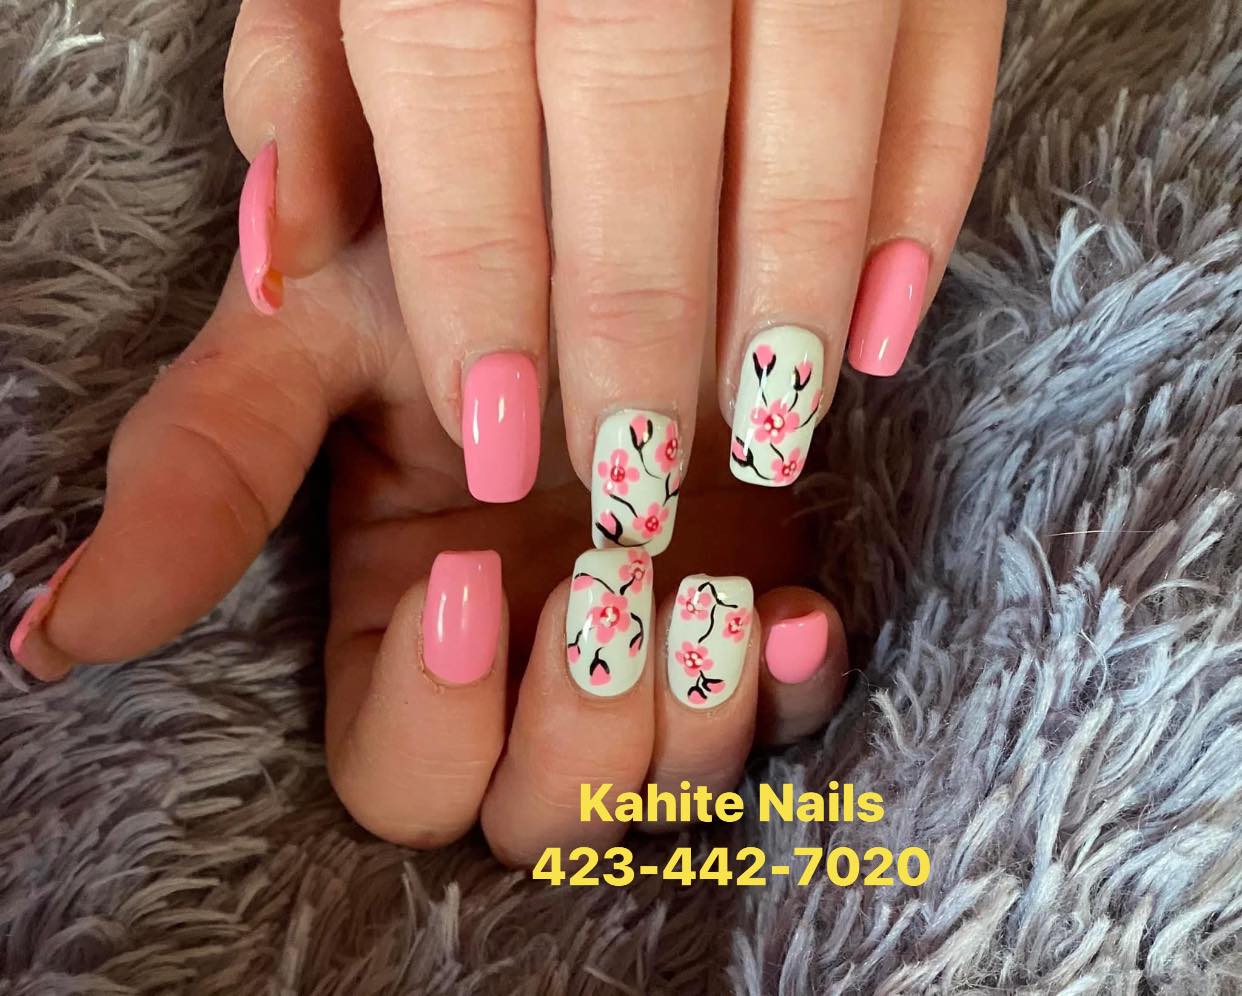 Kahite Nails 2130 US-411 #1, Vonore Tennessee 37885